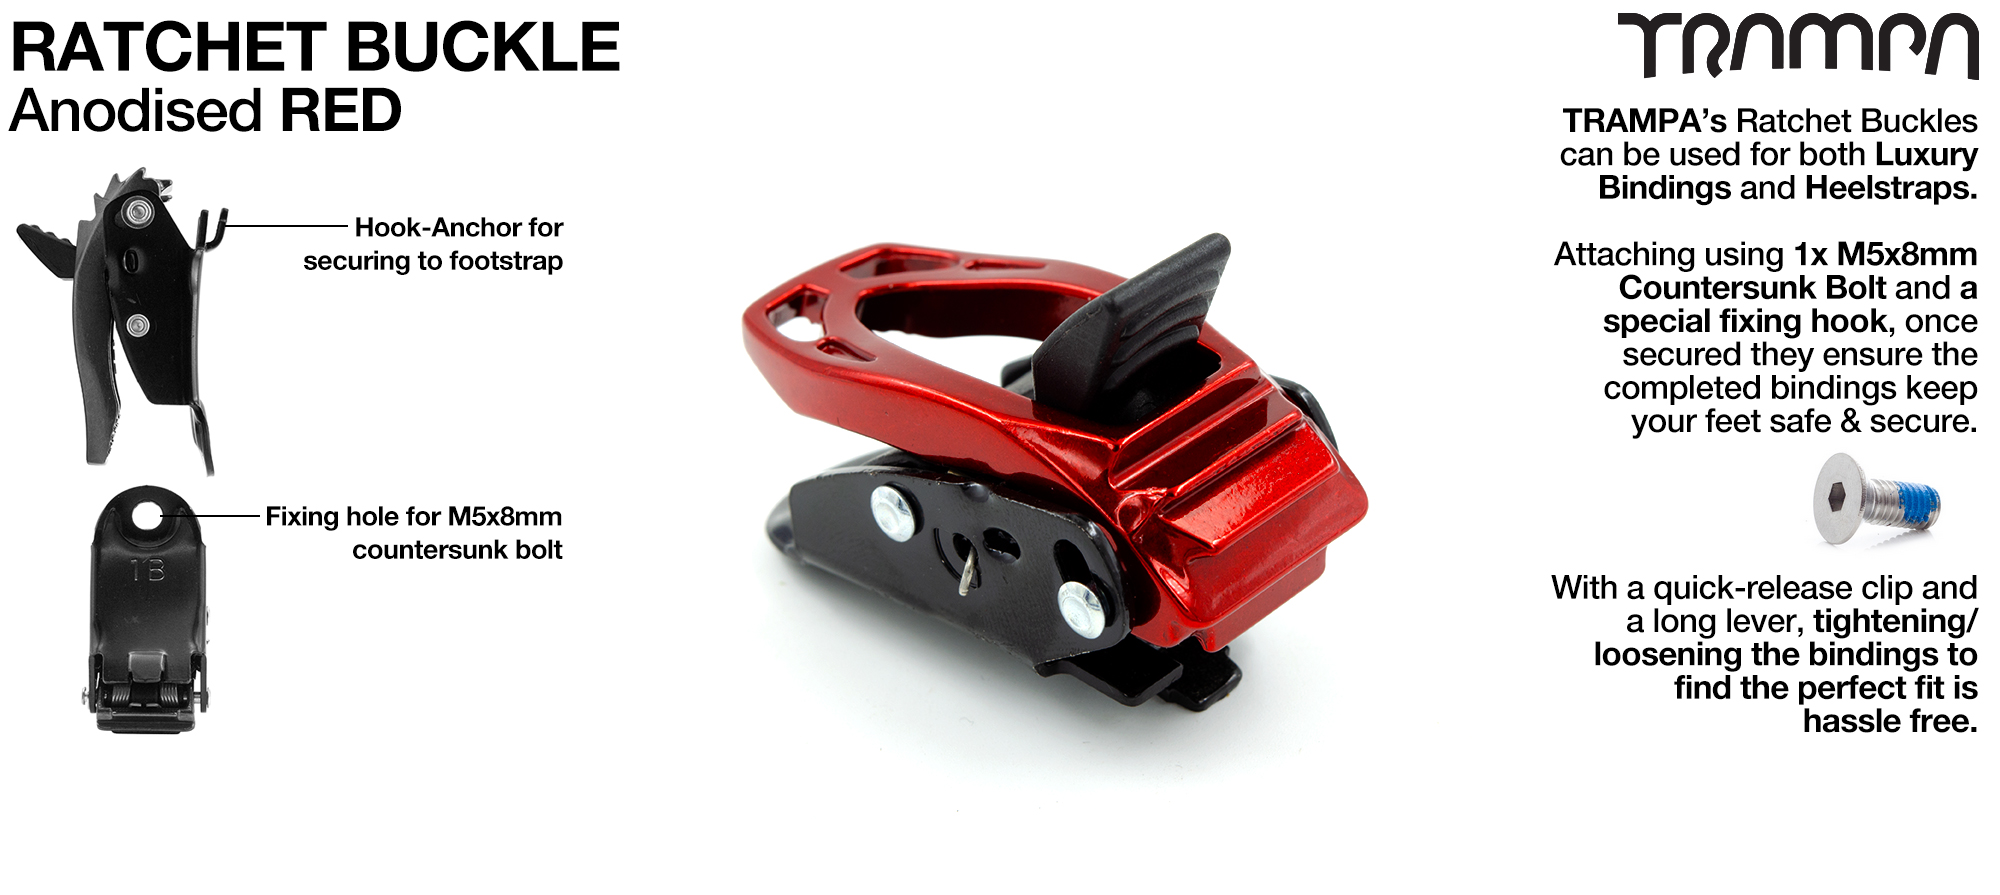 Ratchet Buckle - RED Anodised 